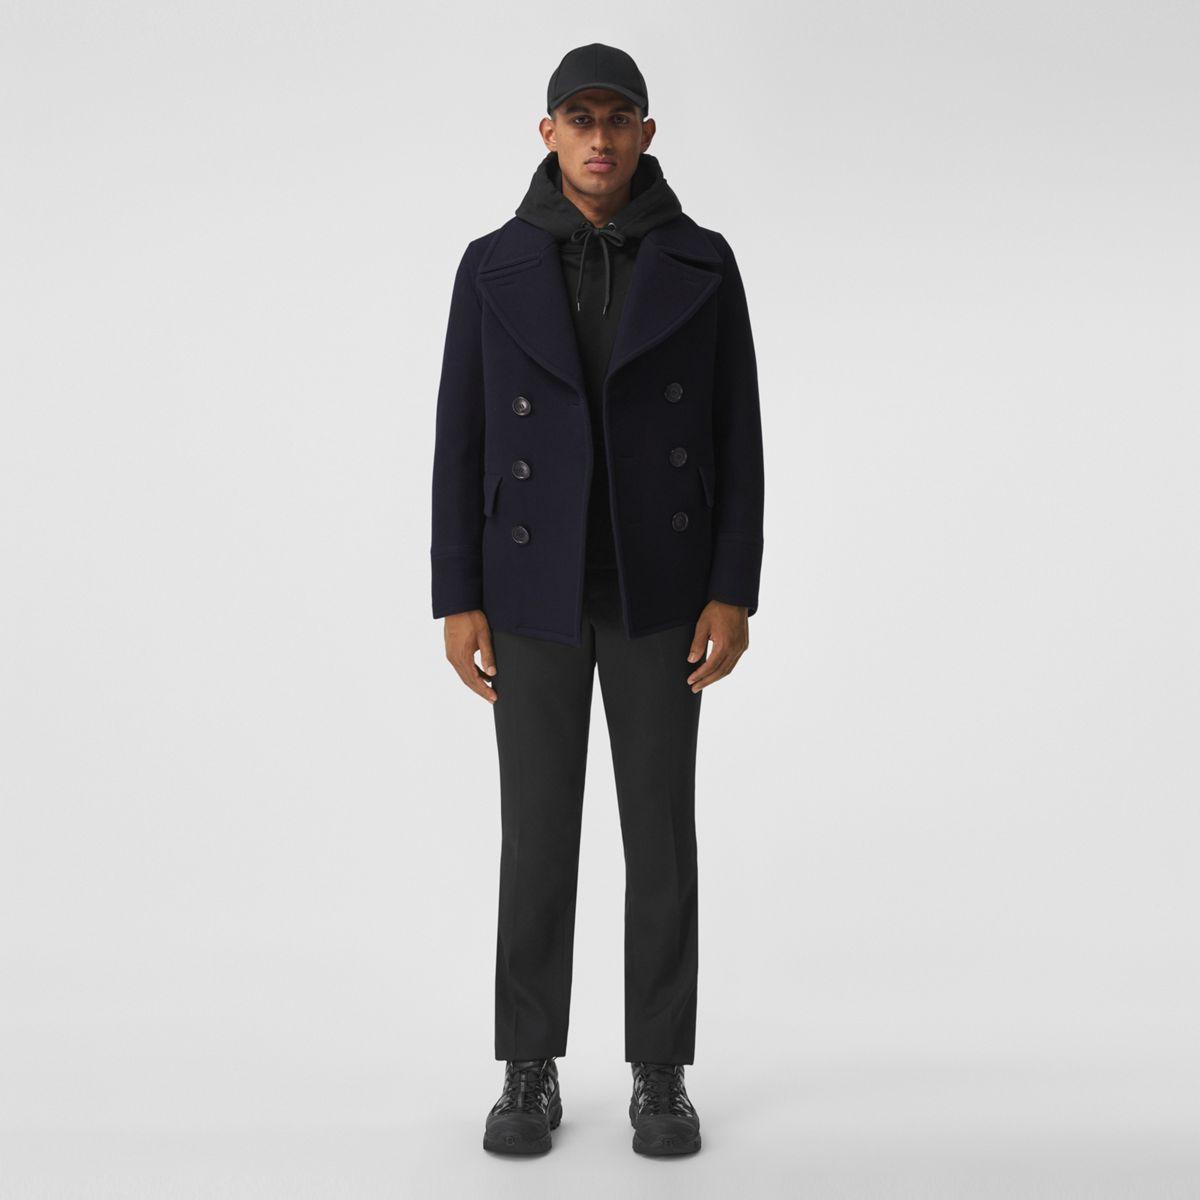 Burberry Wool Blend Pea Coat in Navy Blue (Blue) for Men - Save 15% | Lyst